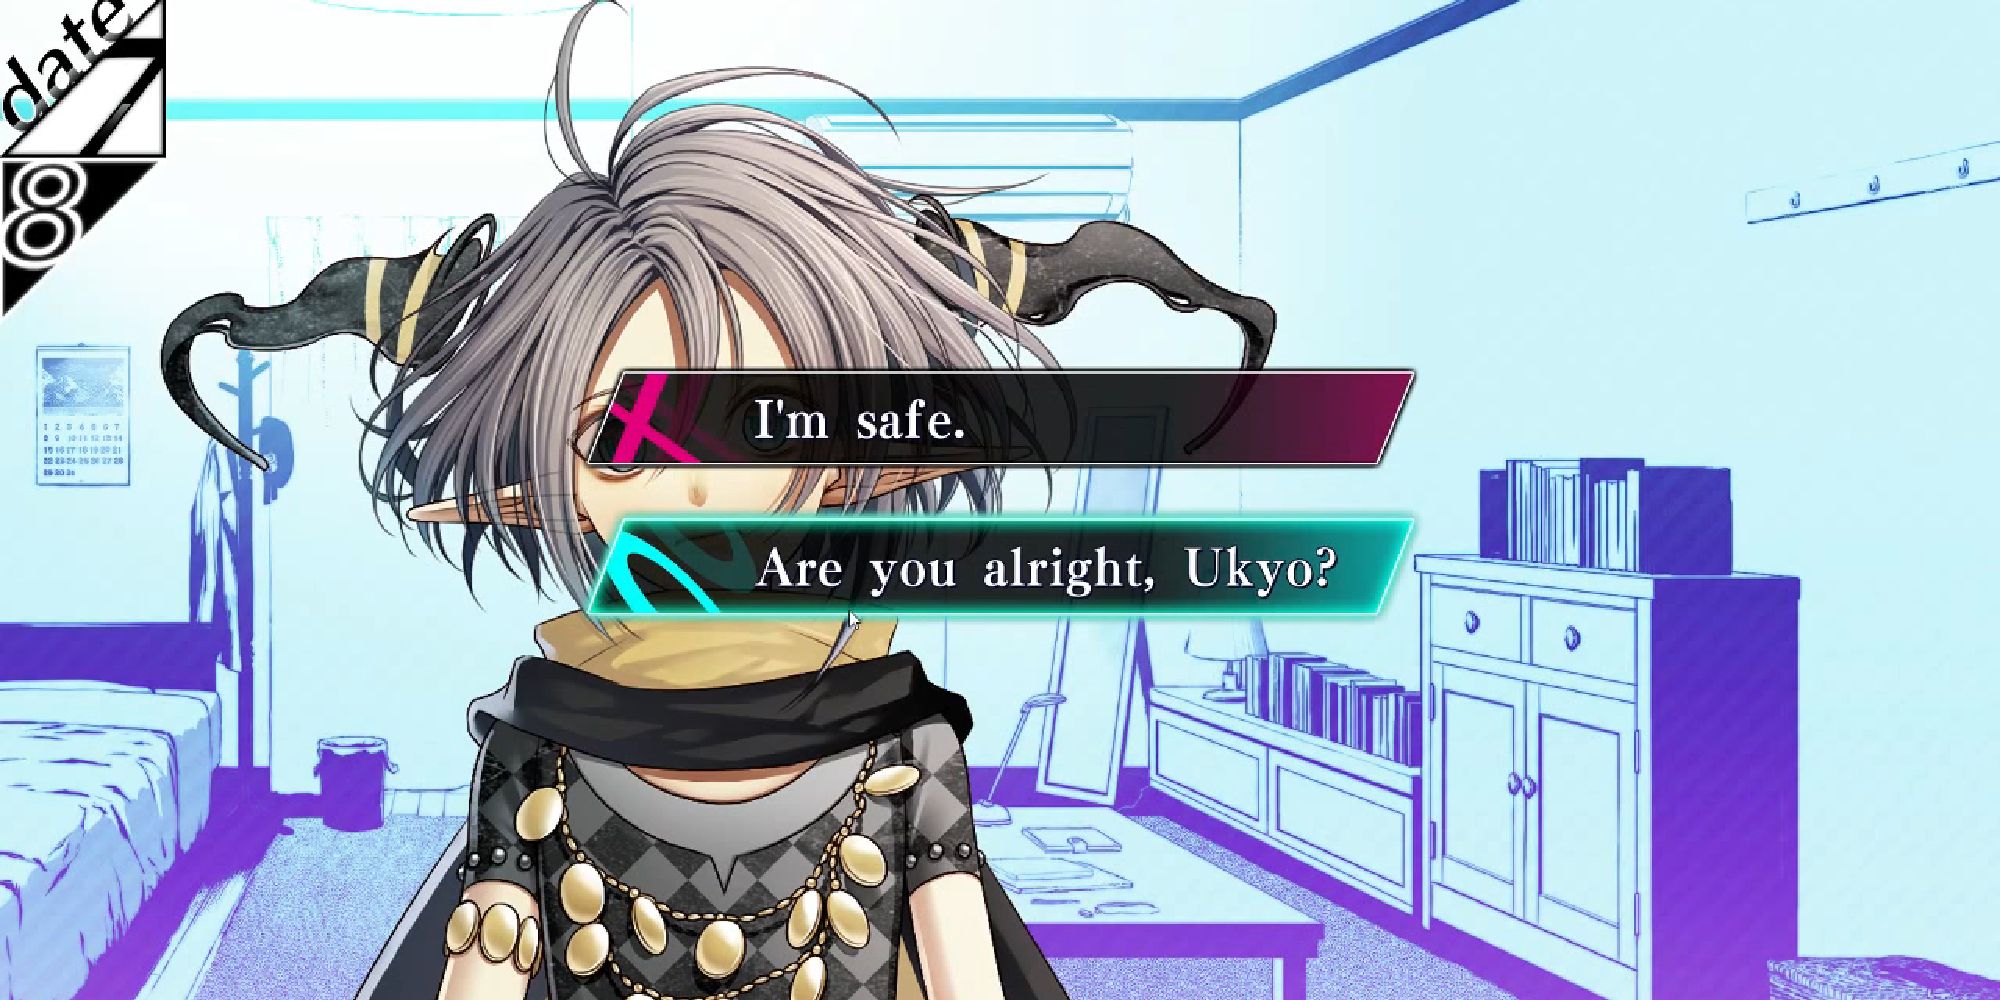 choice between 'I'm safe' and 'are you alright, Ukyo?'